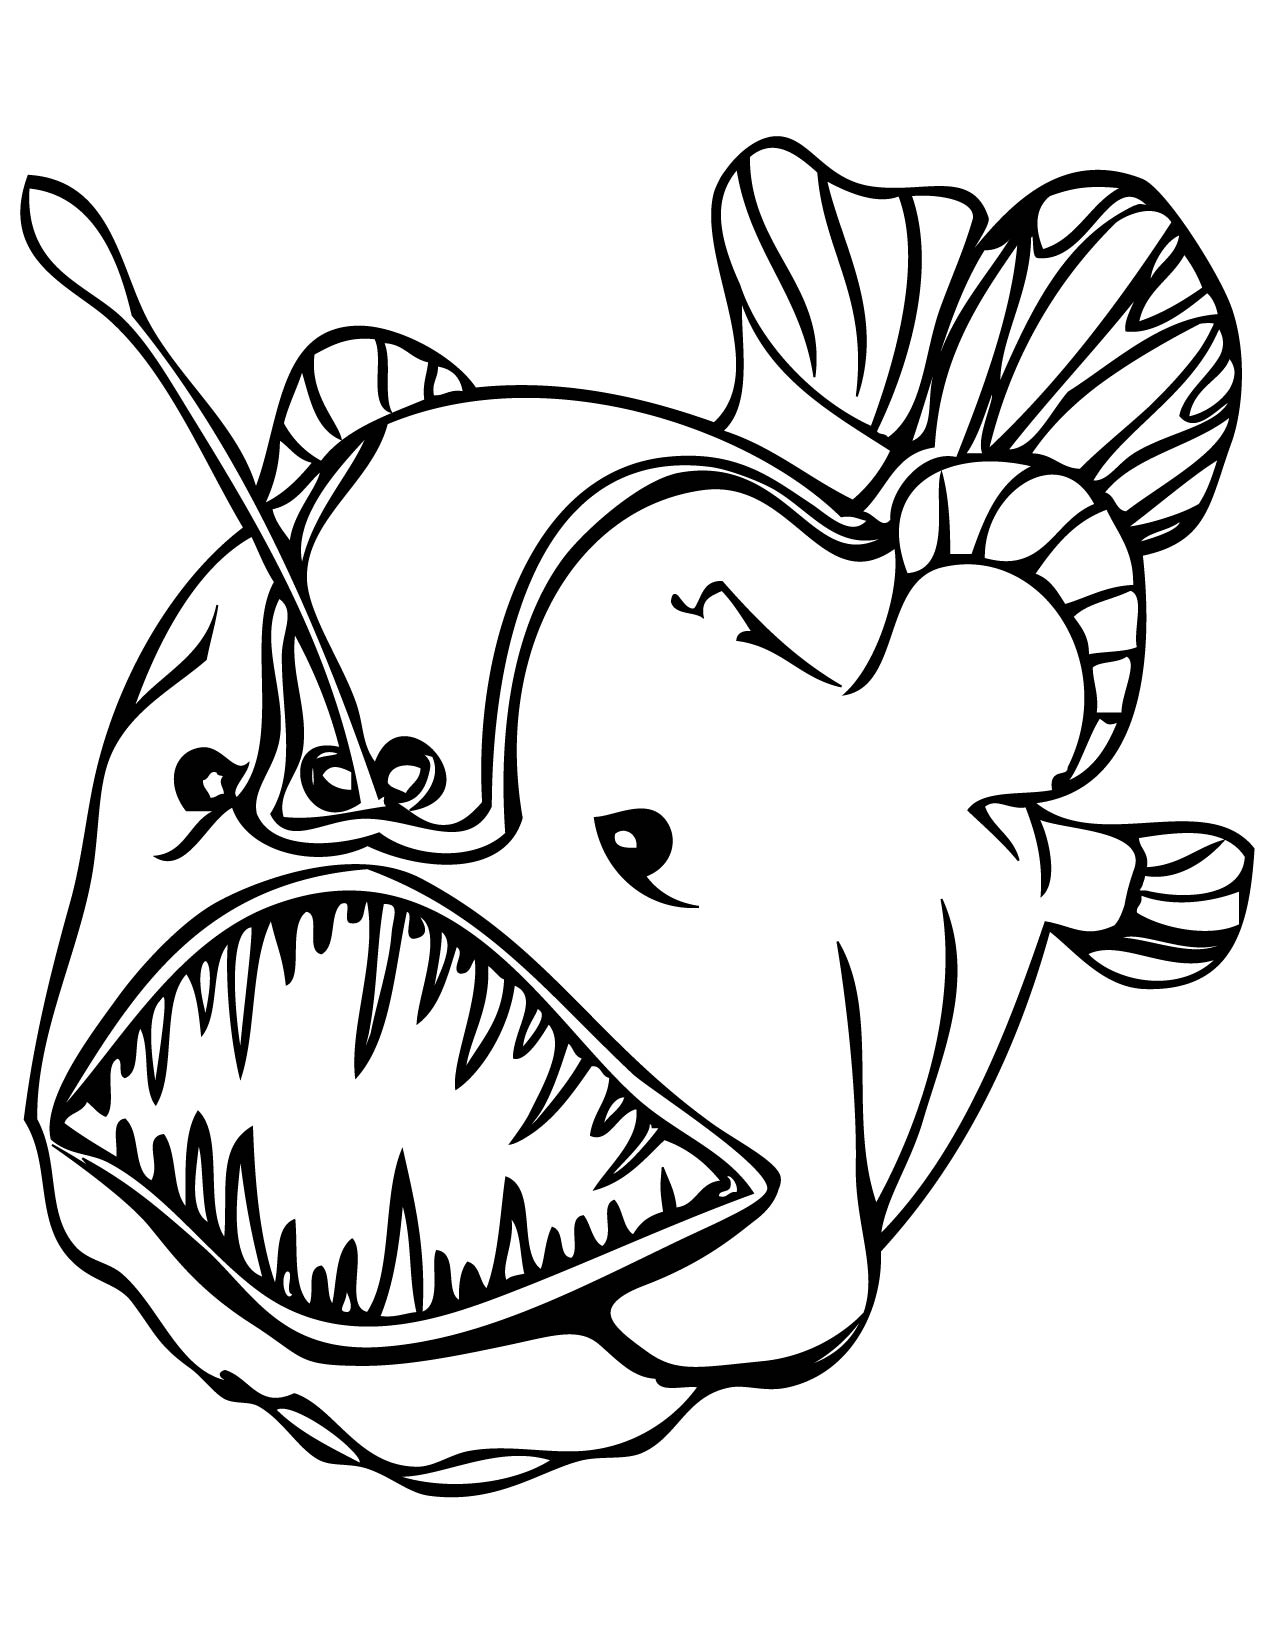 Excellent Coloring Pictures Of Fish 16 #4197